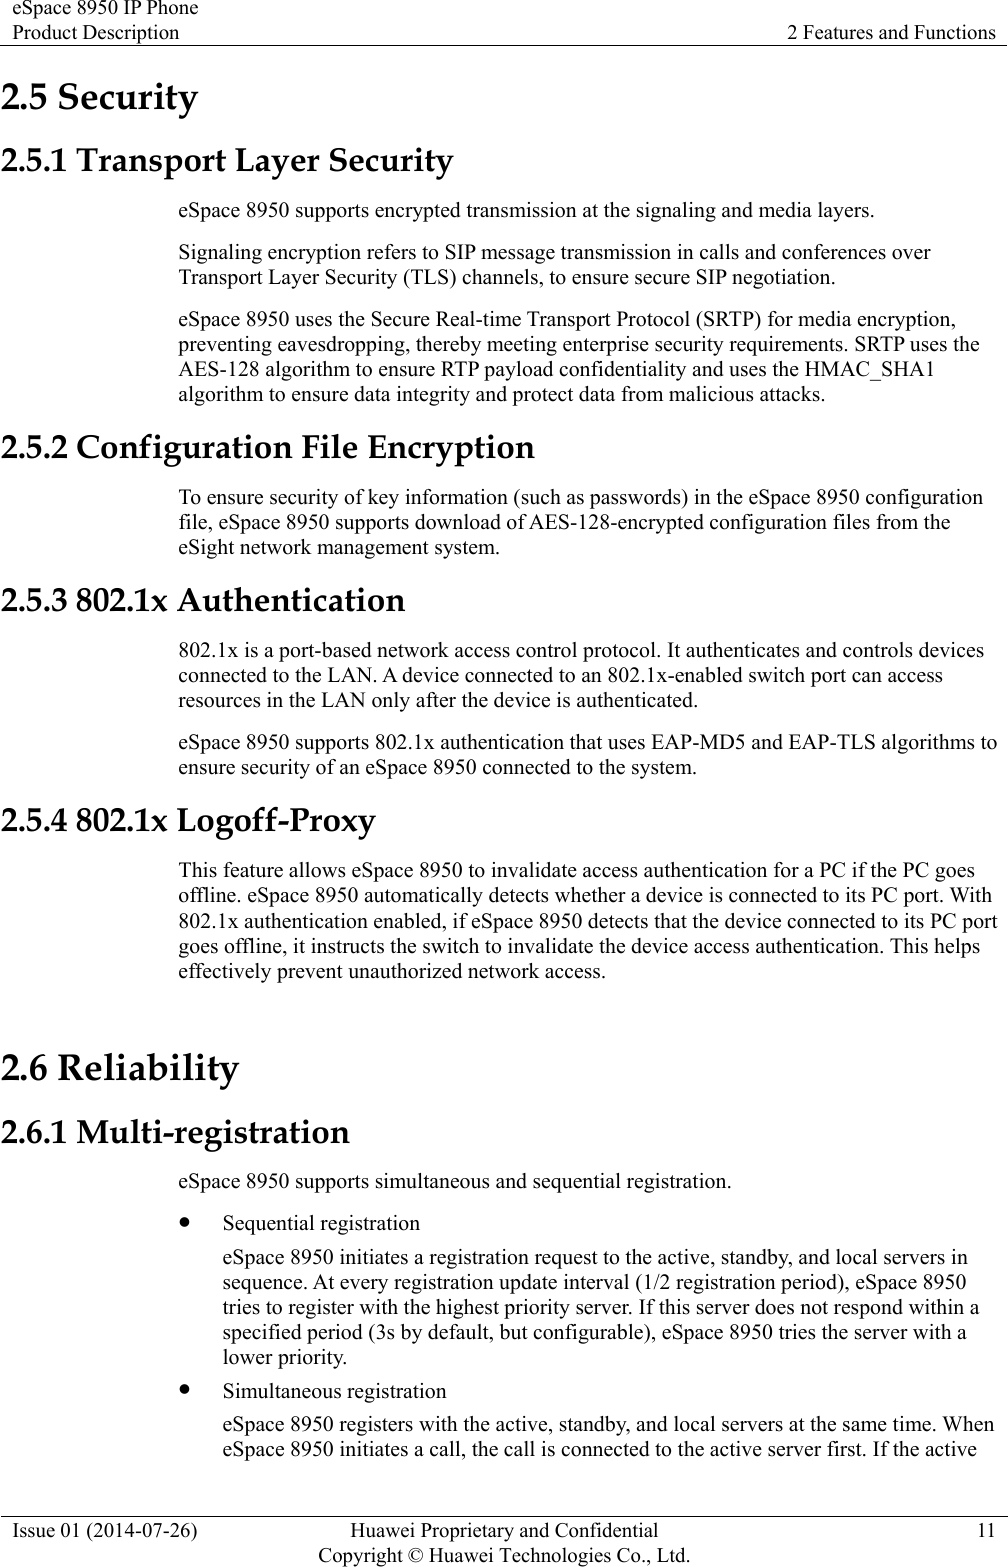 eSpace 8950 IP Phone Product Description  2 Features and Functions Issue 01 (2014-07-26)  Huawei Proprietary and Confidential         Copyright © Huawei Technologies Co., Ltd.11 2.5 Security 2.5.1 Transport Layer Security eSpace 8950 supports encrypted transmission at the signaling and media layers. Signaling encryption refers to SIP message transmission in calls and conferences over Transport Layer Security (TLS) channels, to ensure secure SIP negotiation. eSpace 8950 uses the Secure Real-time Transport Protocol (SRTP) for media encryption, preventing eavesdropping, thereby meeting enterprise security requirements. SRTP uses the AES-128 algorithm to ensure RTP payload confidentiality and uses the HMAC_SHA1 algorithm to ensure data integrity and protect data from malicious attacks. 2.5.2 Configuration File Encryption To ensure security of key information (such as passwords) in the eSpace 8950 configuration file, eSpace 8950 supports download of AES-128-encrypted configuration files from the eSight network management system. 2.5.3 802.1x Authentication 802.1x is a port-based network access control protocol. It authenticates and controls devices connected to the LAN. A device connected to an 802.1x-enabled switch port can access resources in the LAN only after the device is authenticated. eSpace 8950 supports 802.1x authentication that uses EAP-MD5 and EAP-TLS algorithms to ensure security of an eSpace 8950 connected to the system. 2.5.4 802.1x Logoff-Proxy This feature allows eSpace 8950 to invalidate access authentication for a PC if the PC goes offline. eSpace 8950 automatically detects whether a device is connected to its PC port. With 802.1x authentication enabled, if eSpace 8950 detects that the device connected to its PC port goes offline, it instructs the switch to invalidate the device access authentication. This helps effectively prevent unauthorized network access. 2.6 Reliability 2.6.1 Multi-registration eSpace 8950 supports simultaneous and sequential registration.  Sequential registration eSpace 8950 initiates a registration request to the active, standby, and local servers in sequence. At every registration update interval (1/2 registration period), eSpace 8950 tries to register with the highest priority server. If this server does not respond within a specified period (3s by default, but configurable), eSpace 8950 tries the server with a lower priority.  Simultaneous registration eSpace 8950 registers with the active, standby, and local servers at the same time. When eSpace 8950 initiates a call, the call is connected to the active server first. If the active 